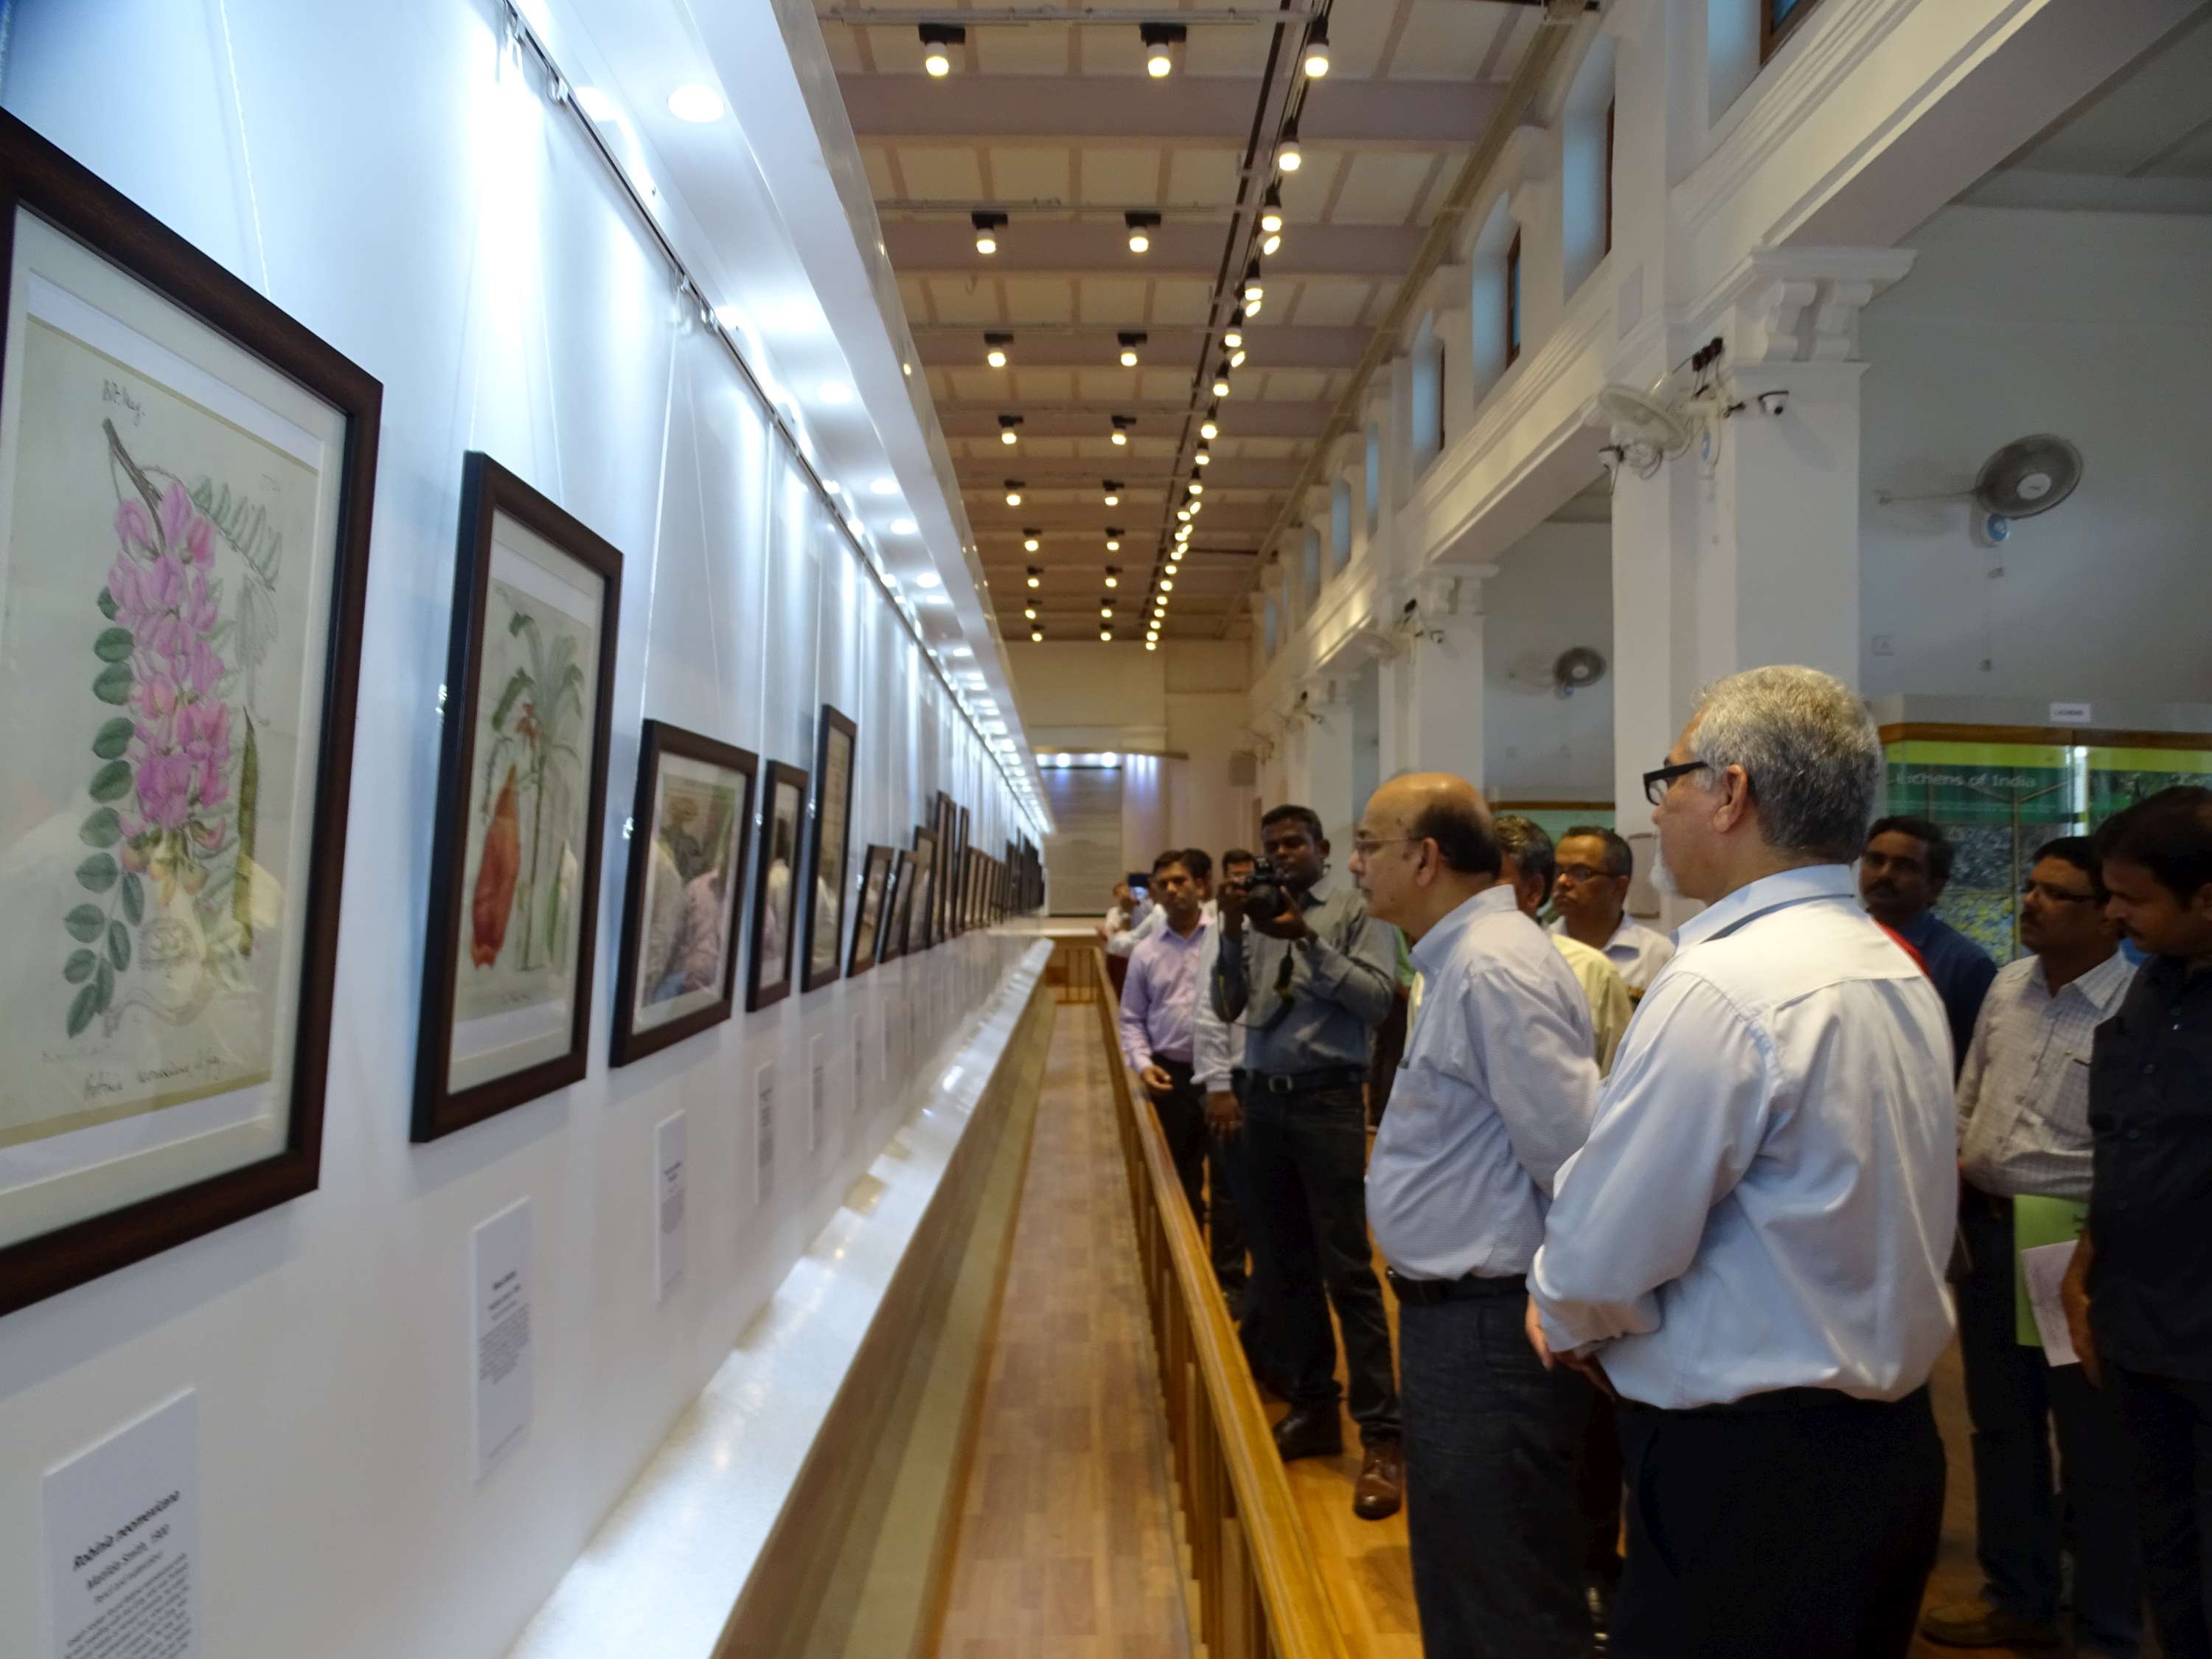 The Secretary, MOEF&CC keenly observing the exhibits of Botanical Gallery in Indian Museum, Kolkata 